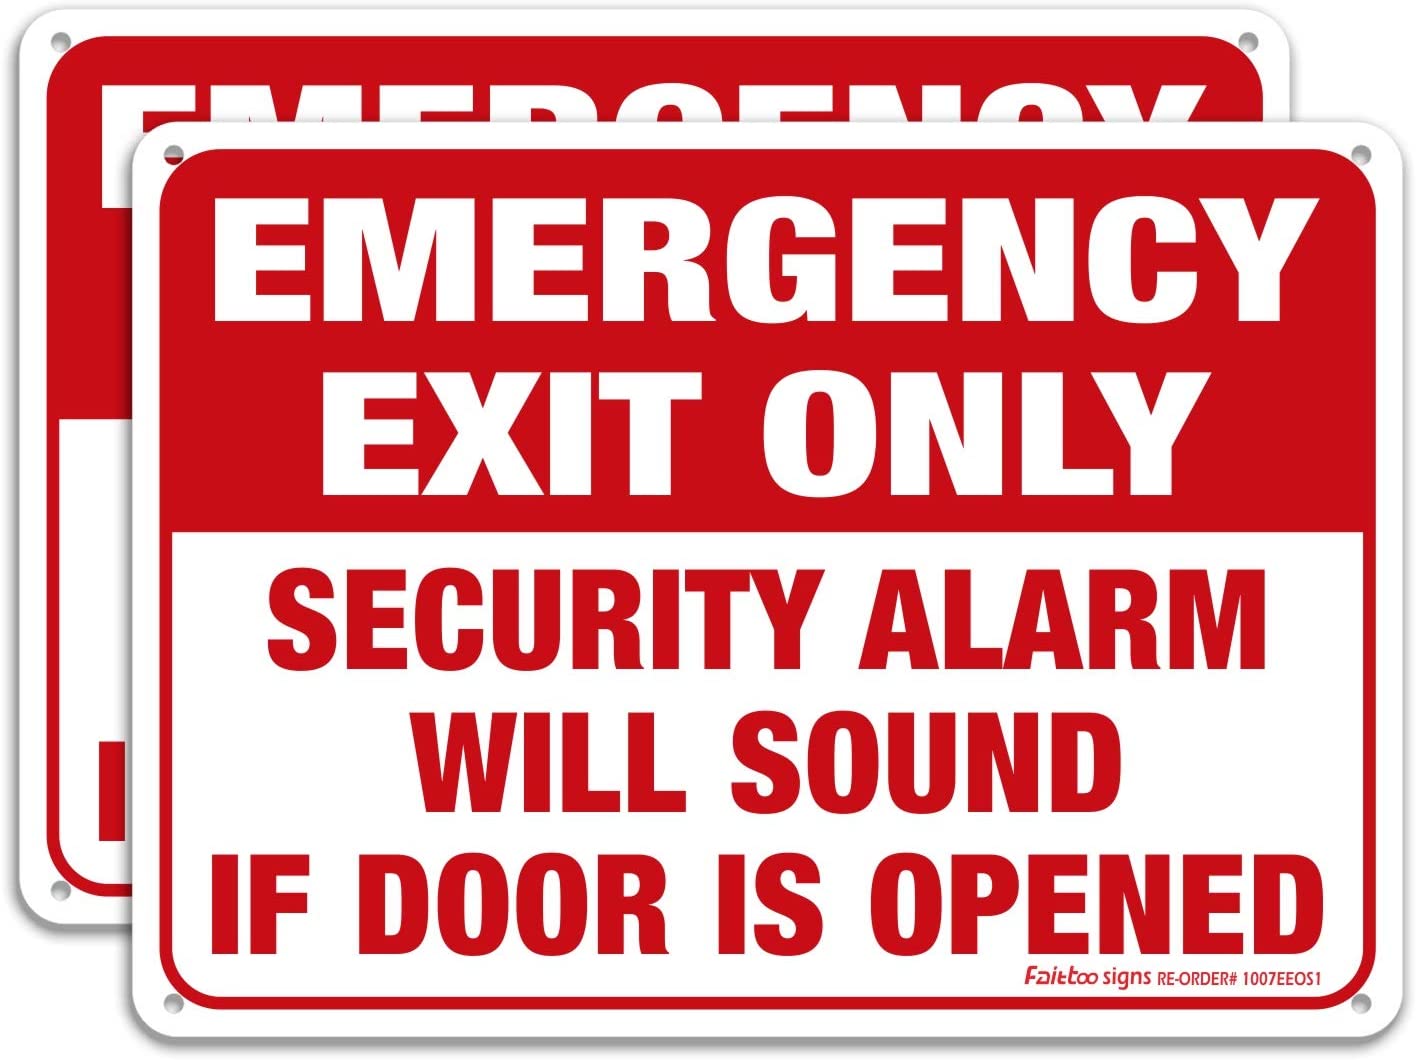 Emergency Exit Only Sticker, Emergency Exit Only - Security Alarm Will Sound If Door Is Opened Label, 10 x 7 inch Self-Adhesive Vinyl Decal Stickers, Reflective, UV Protected, Waterproof